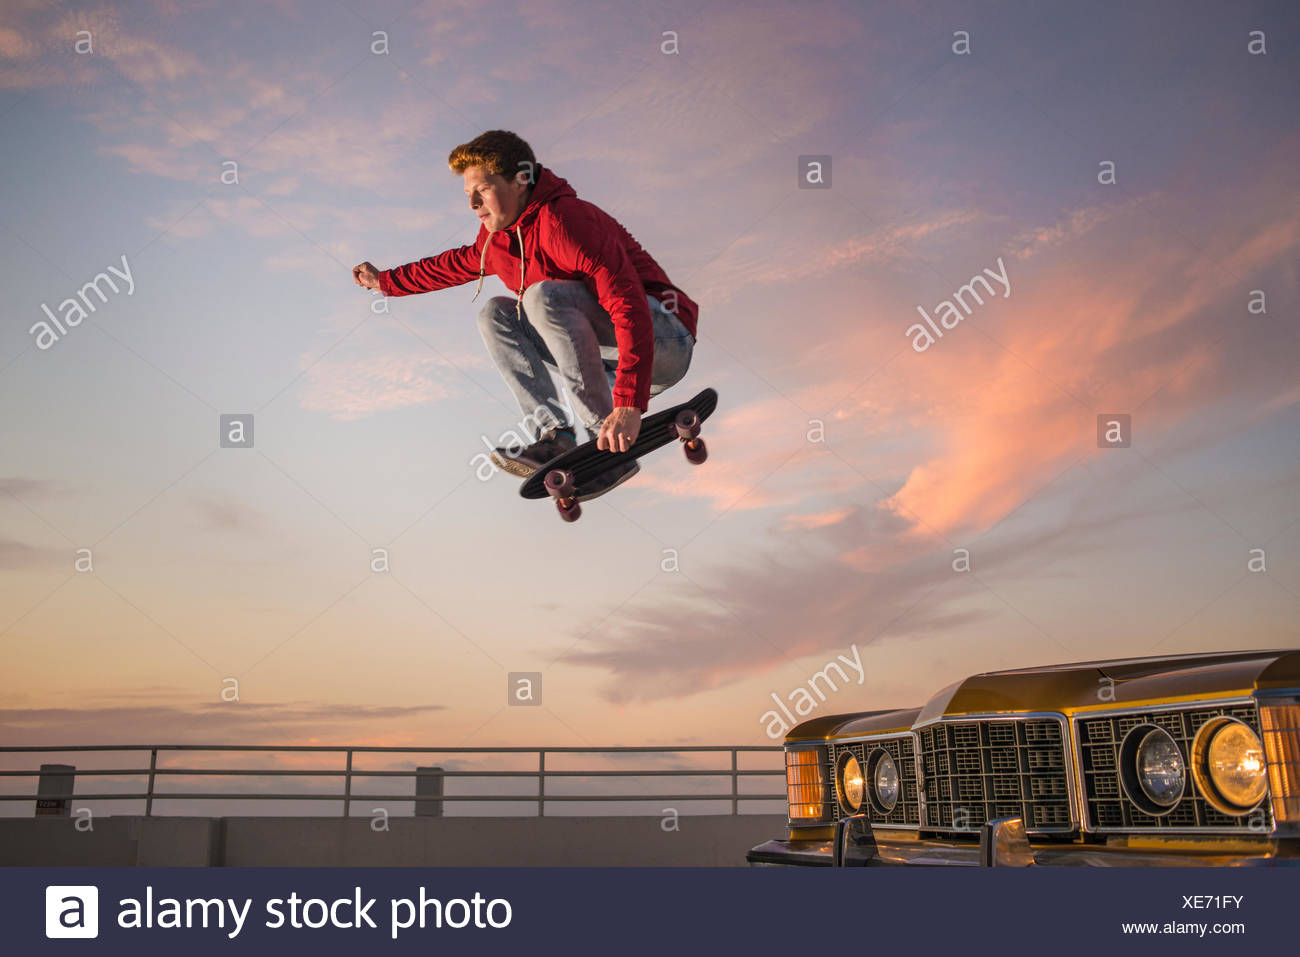 Portrait of young man on skateboard in mid air Stock Photo ...